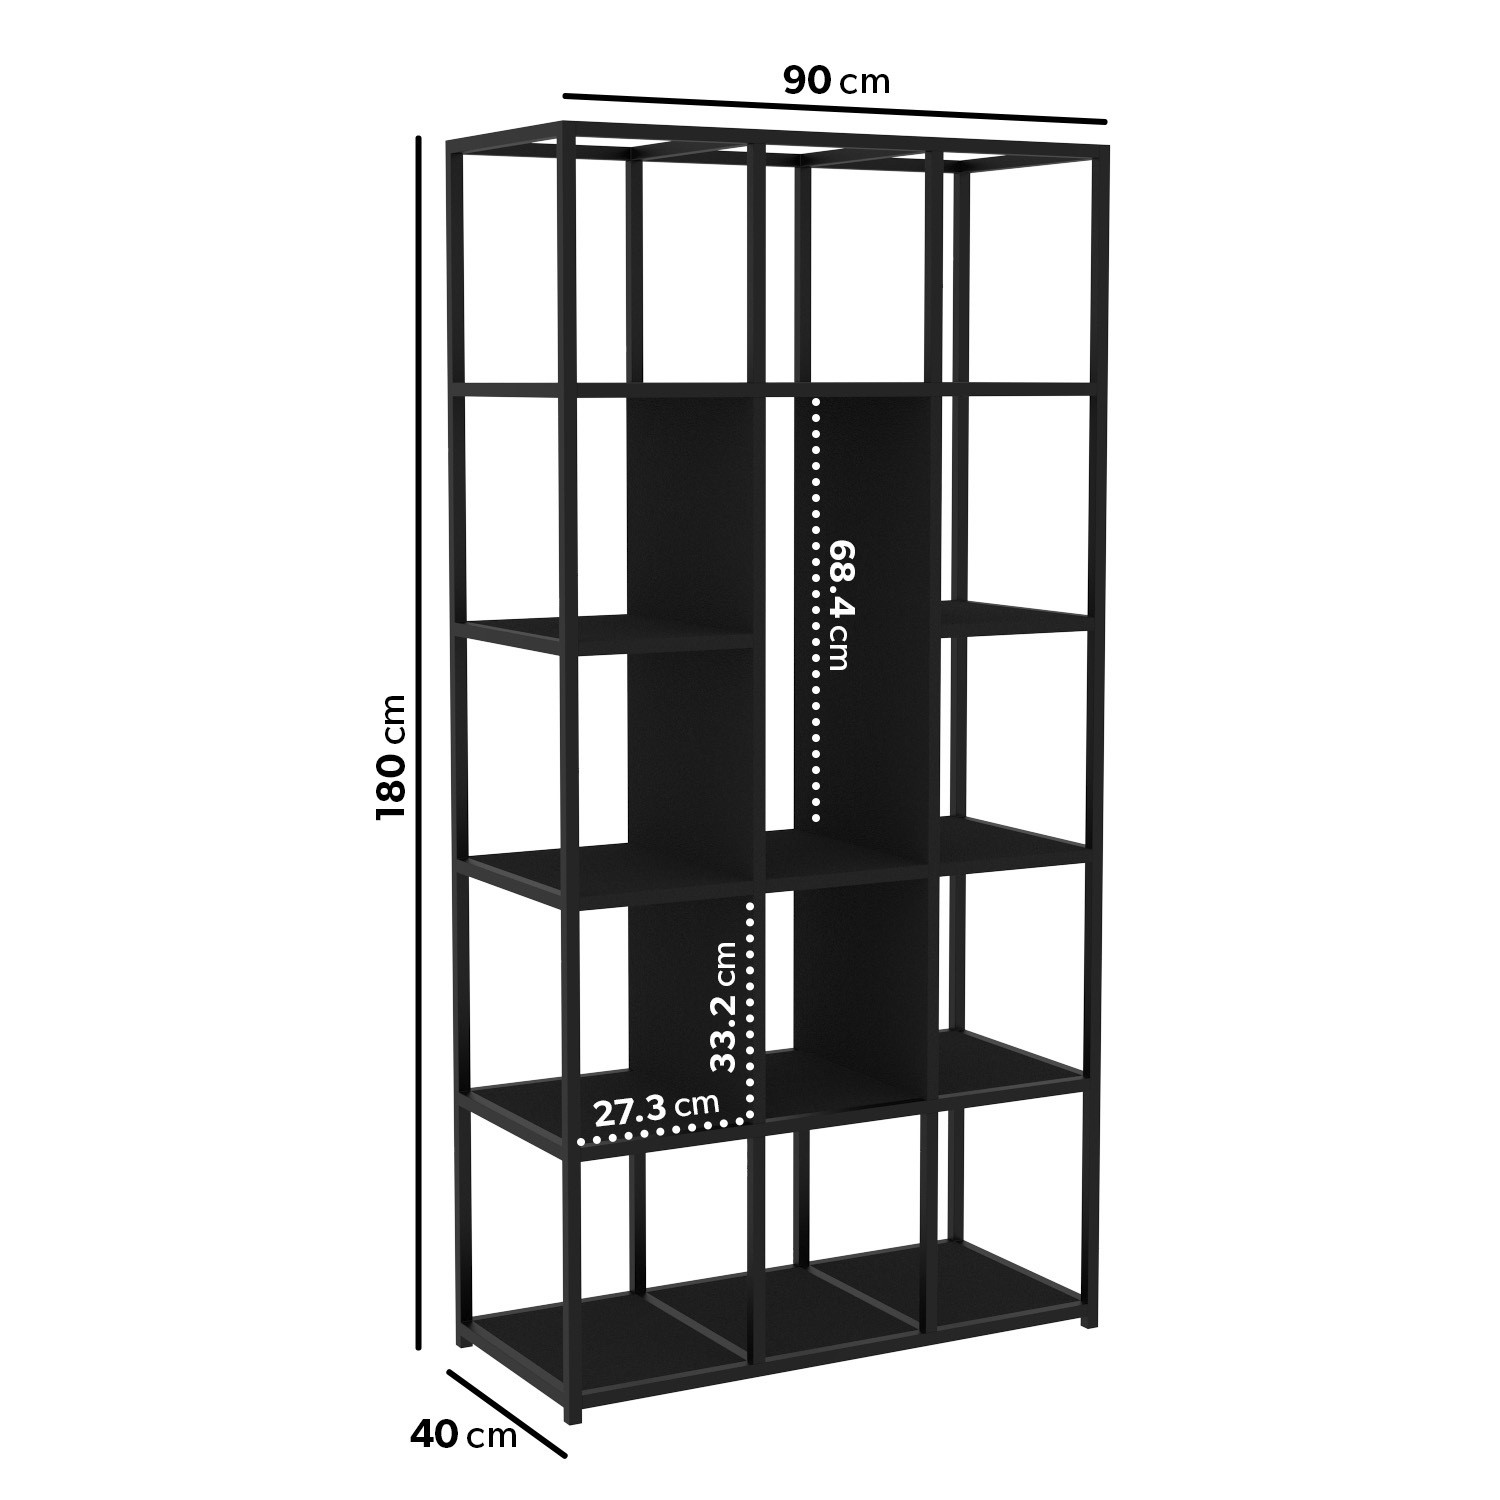 Read more about Tall black metal open bookcase larsen